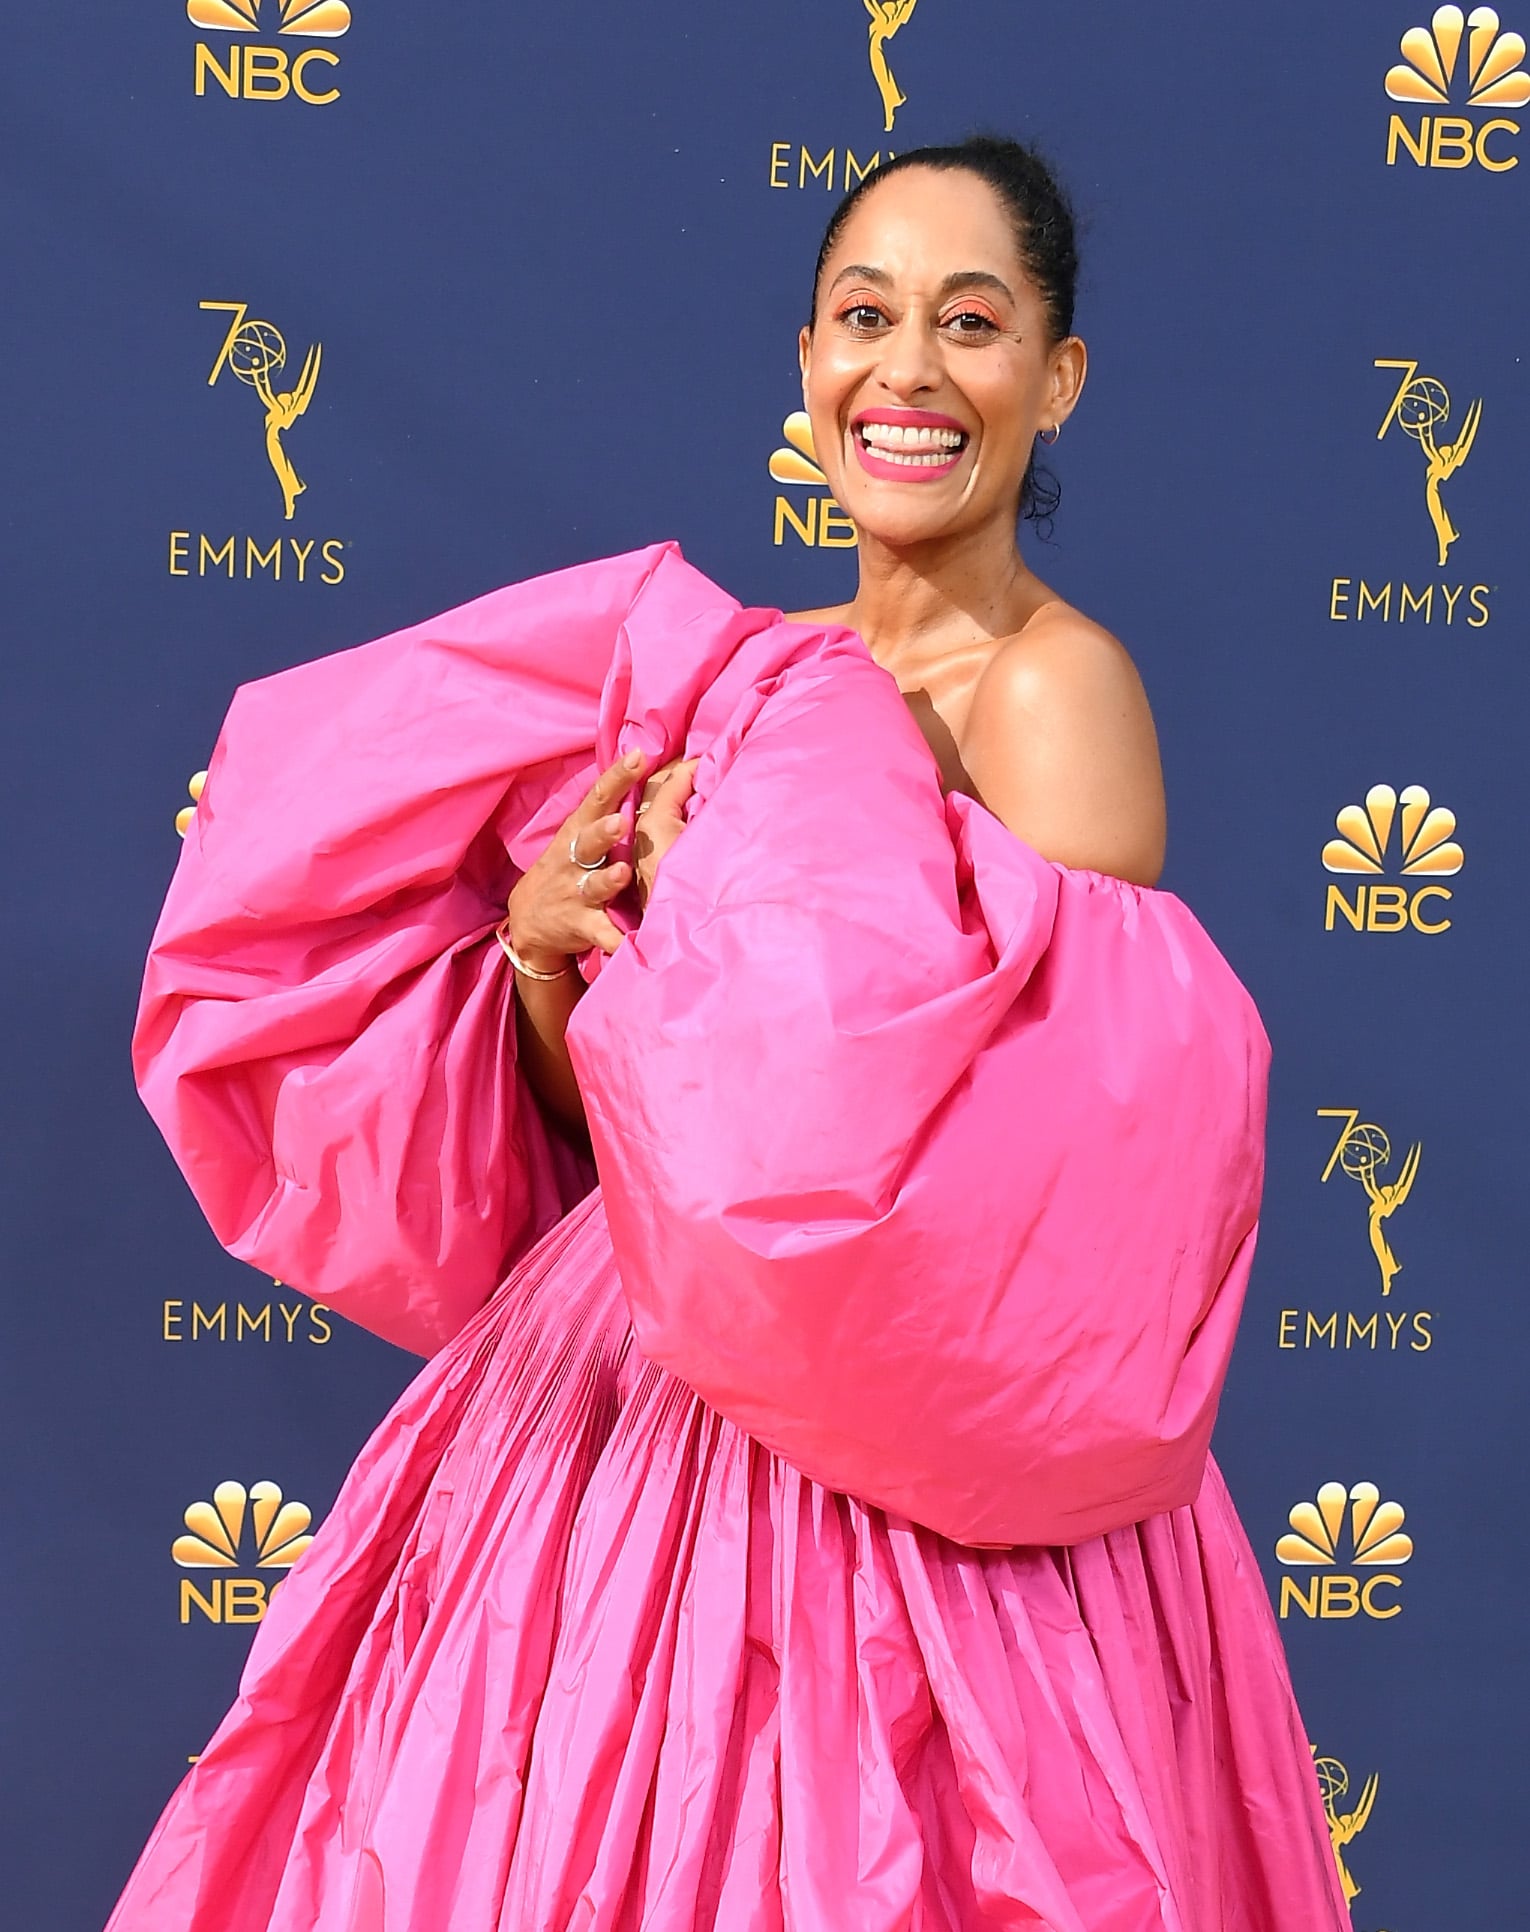 LOS ANGELES, CA - SEPTEMBER 17:  Tracee Ellis Ross attends the 70th Emmy Awards at Microsoft Theatre on September 17, 2018 in Los Angeles, California.  (Photo by Steve Granitz/WireImage,)